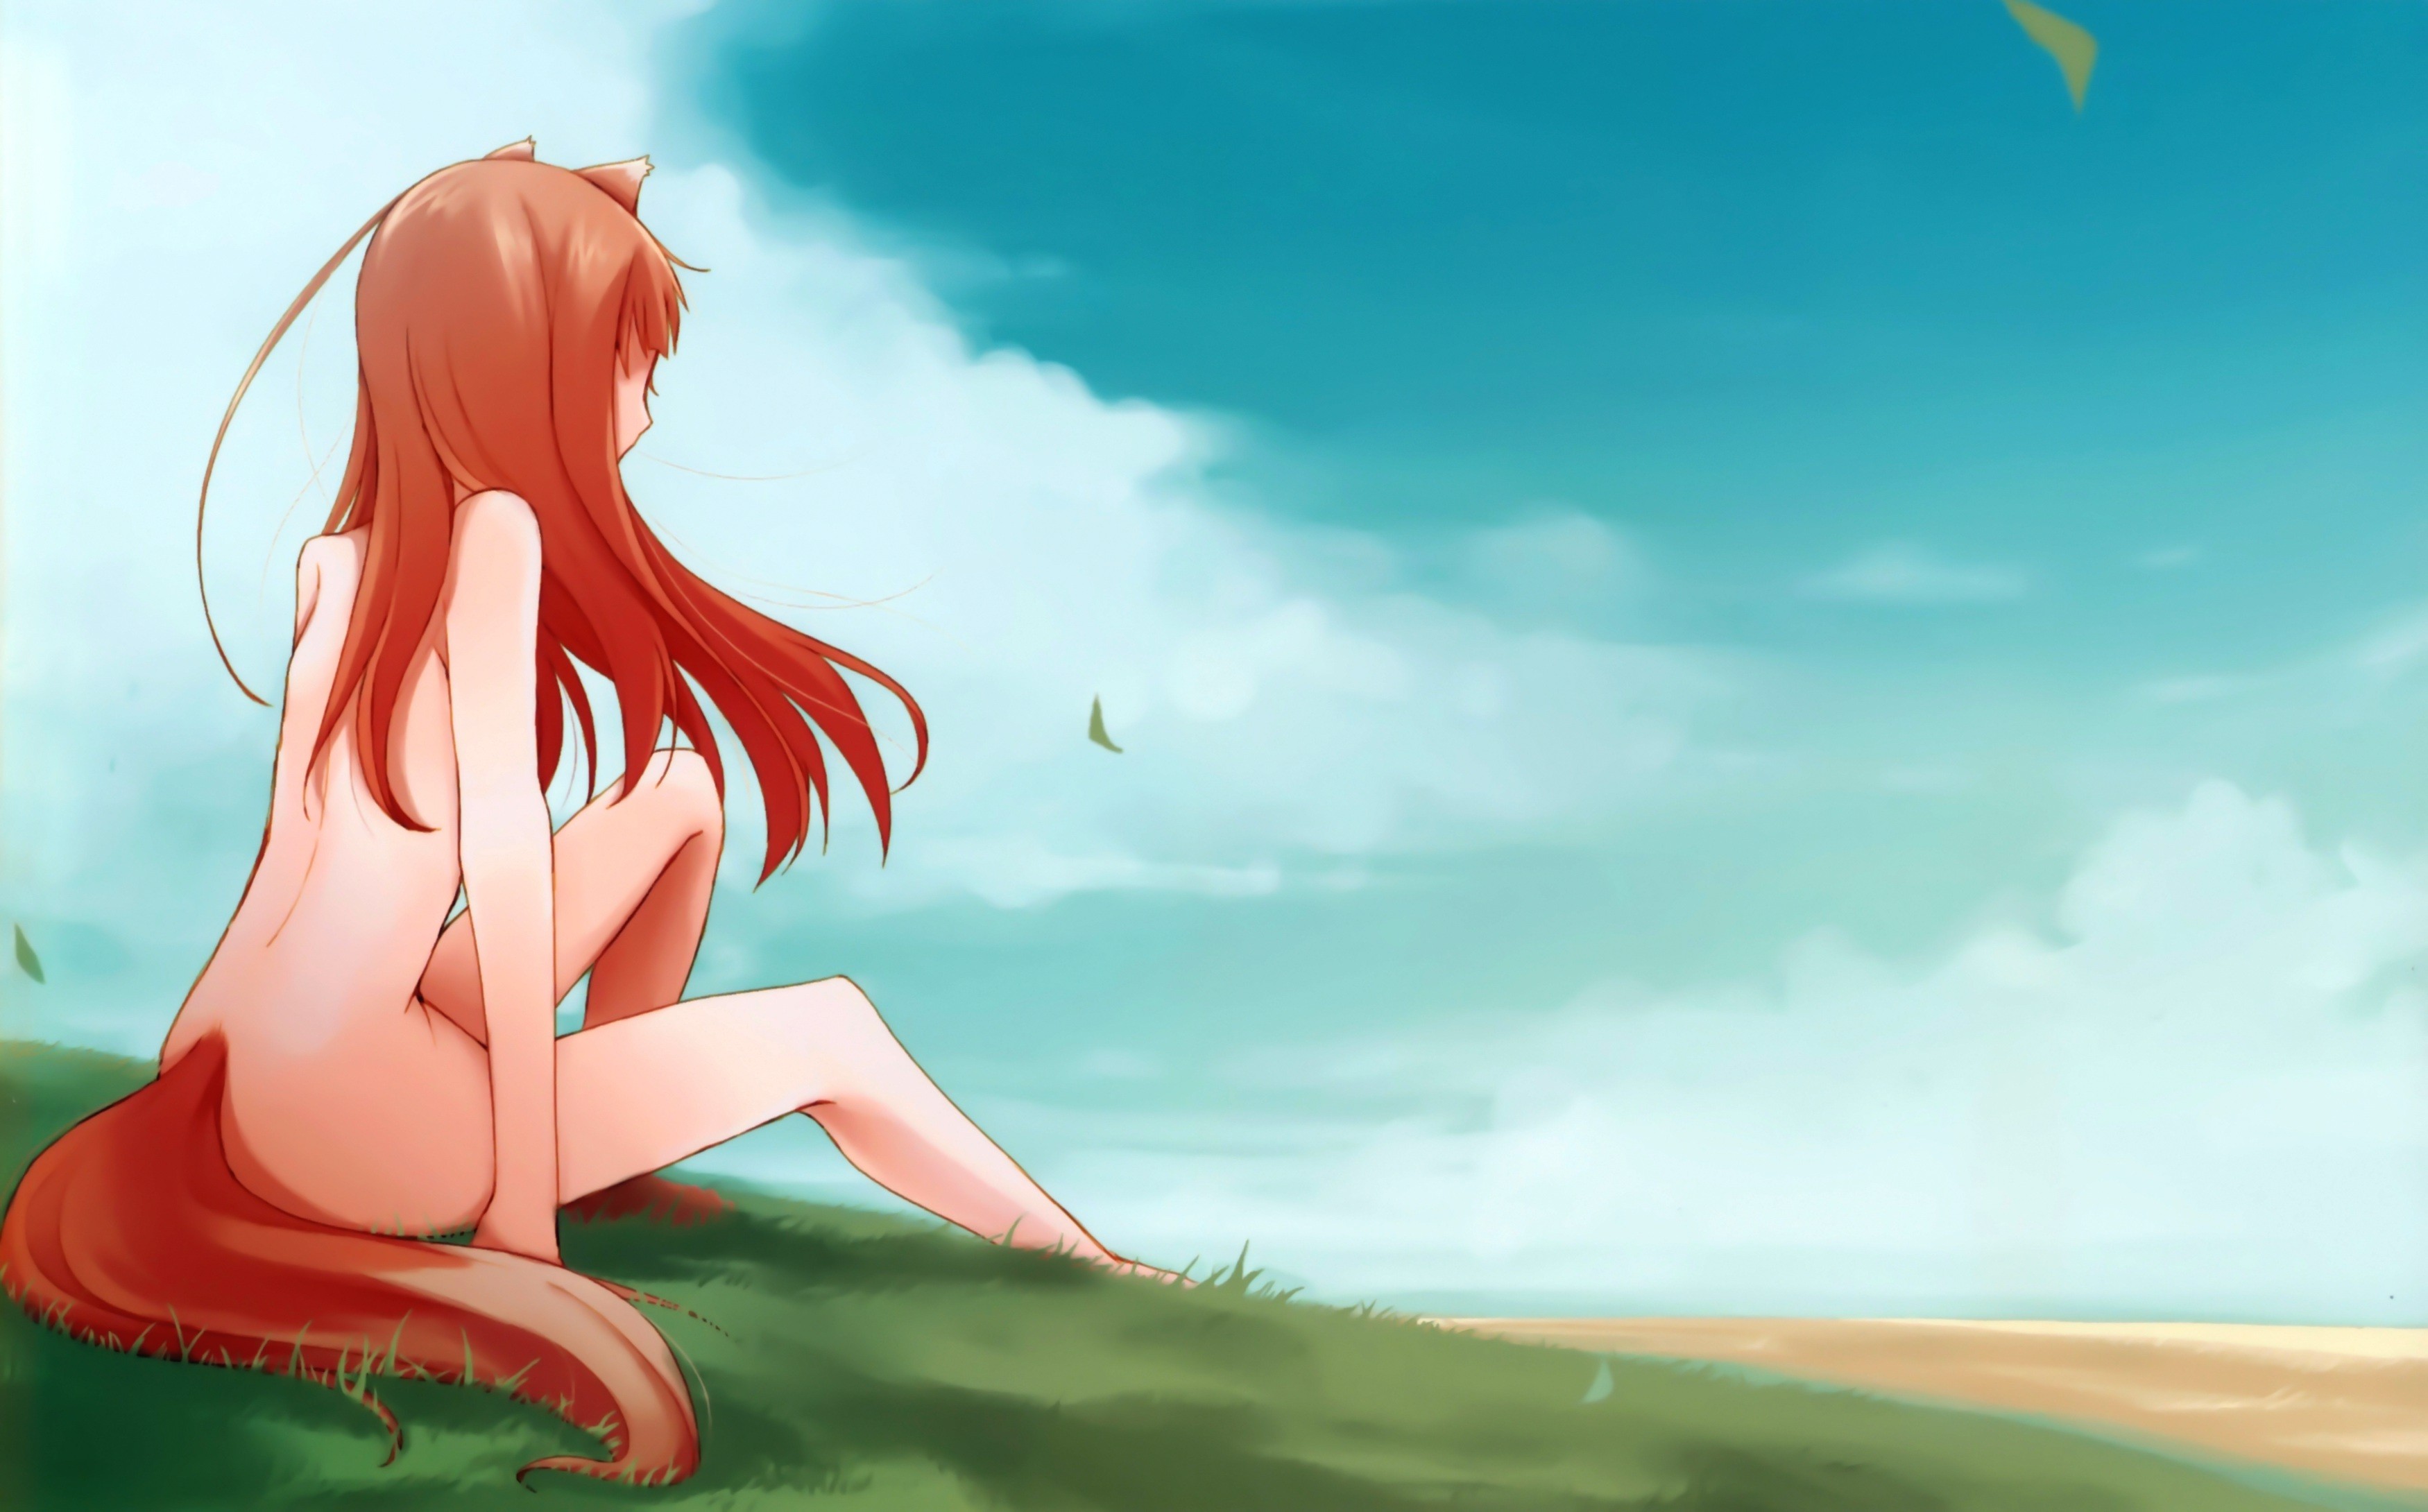 3500px x 2180px - Spice and Wolf, Holo, nude, anime, anime girls, kitsunemimi - wallpaper  #187284 (3500x2180px) on Wallls.com